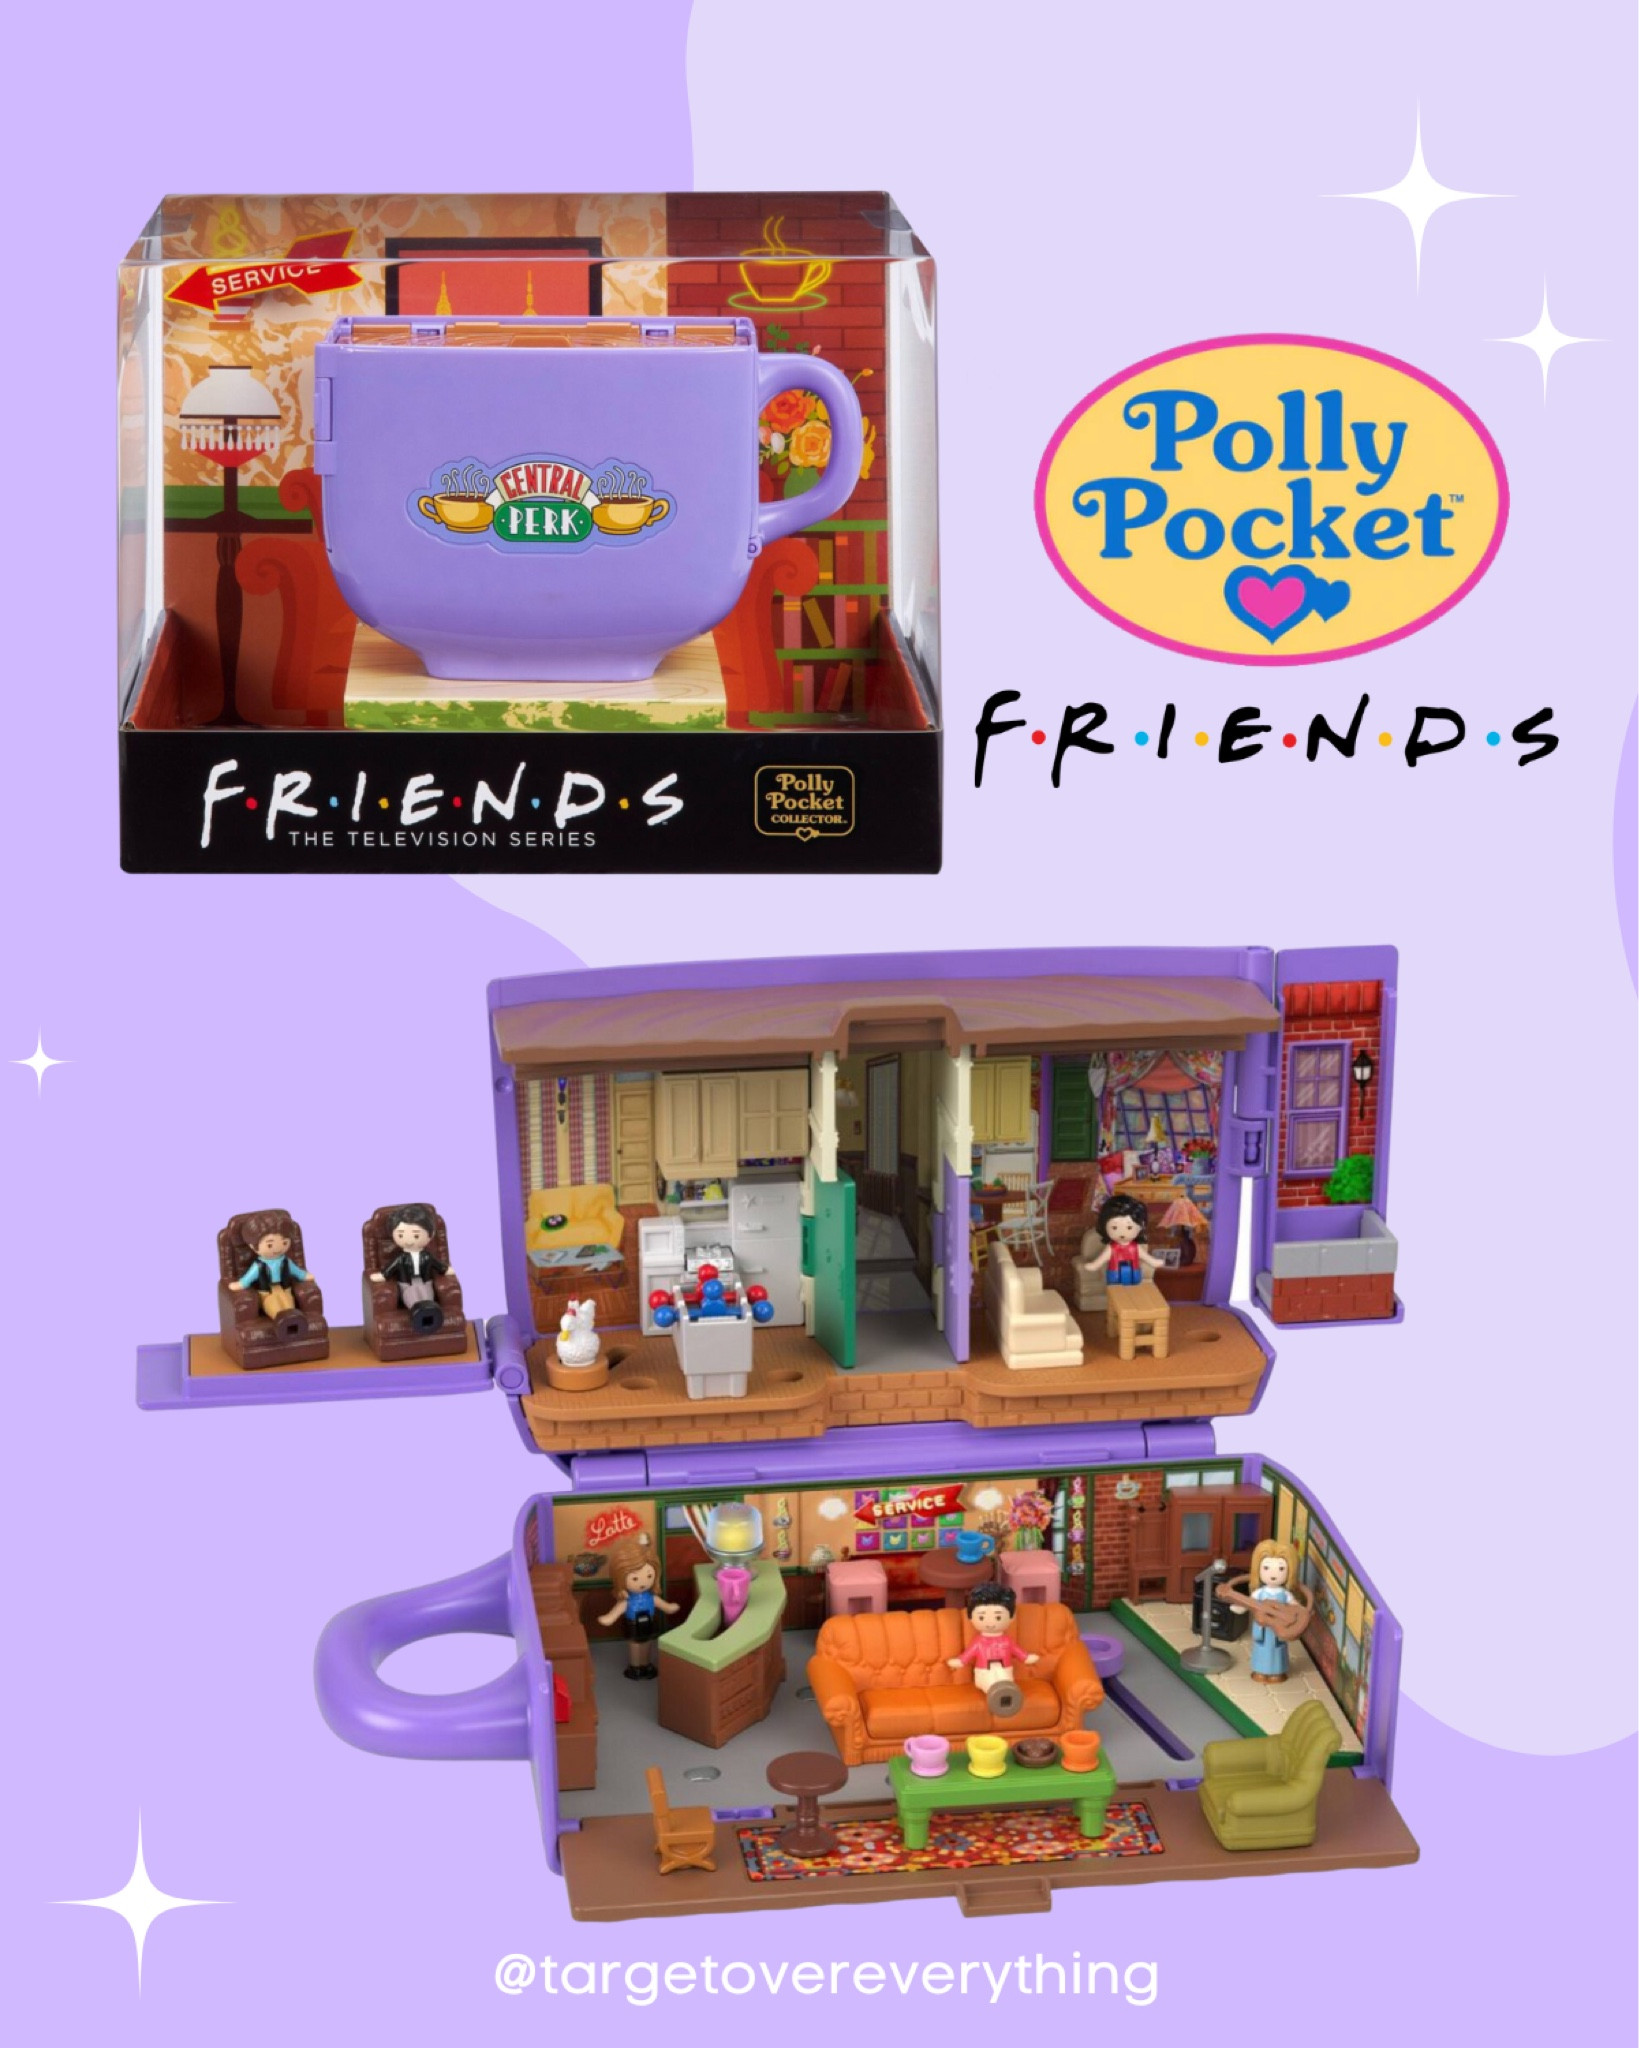 So happy to get my hands on this Friends Polly Pocket collector! This has  to be my favourite one! While watching Friends will never be the…